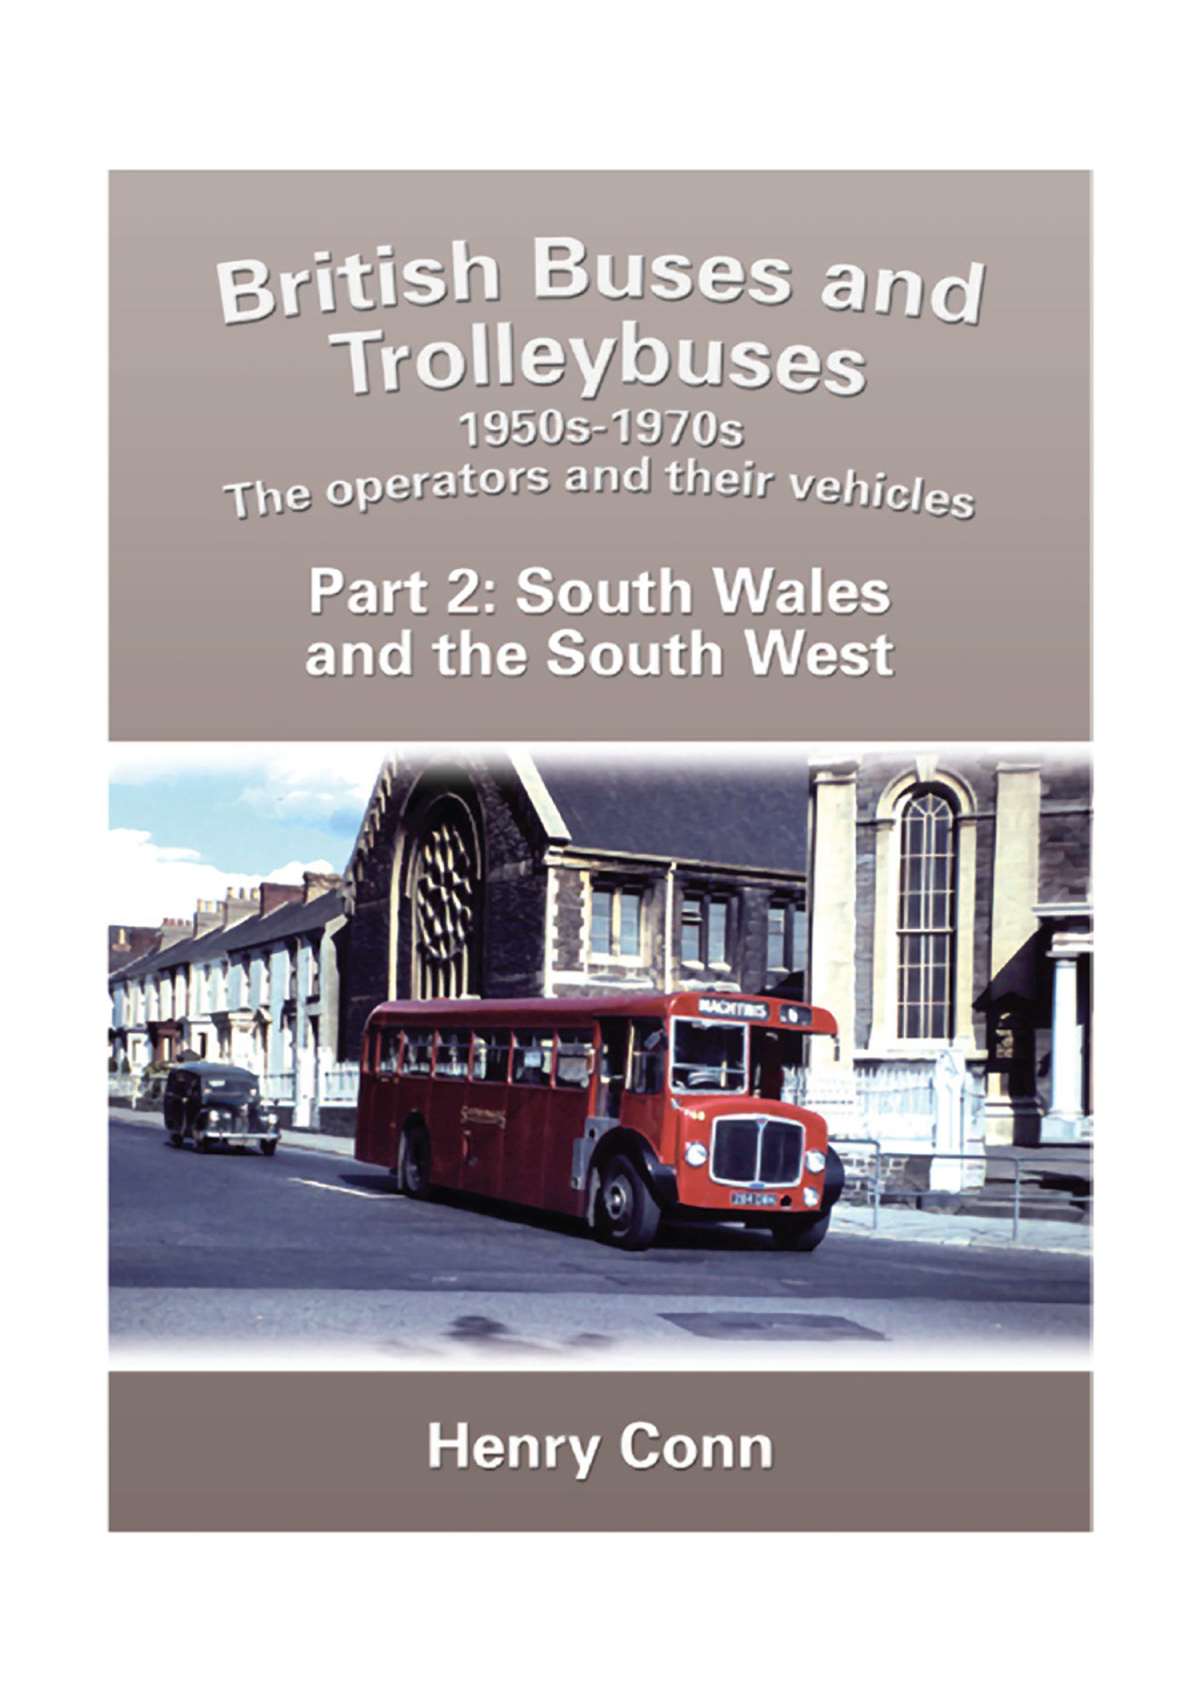 3429 - Buses & Trolleybuses Part 2: South Wales